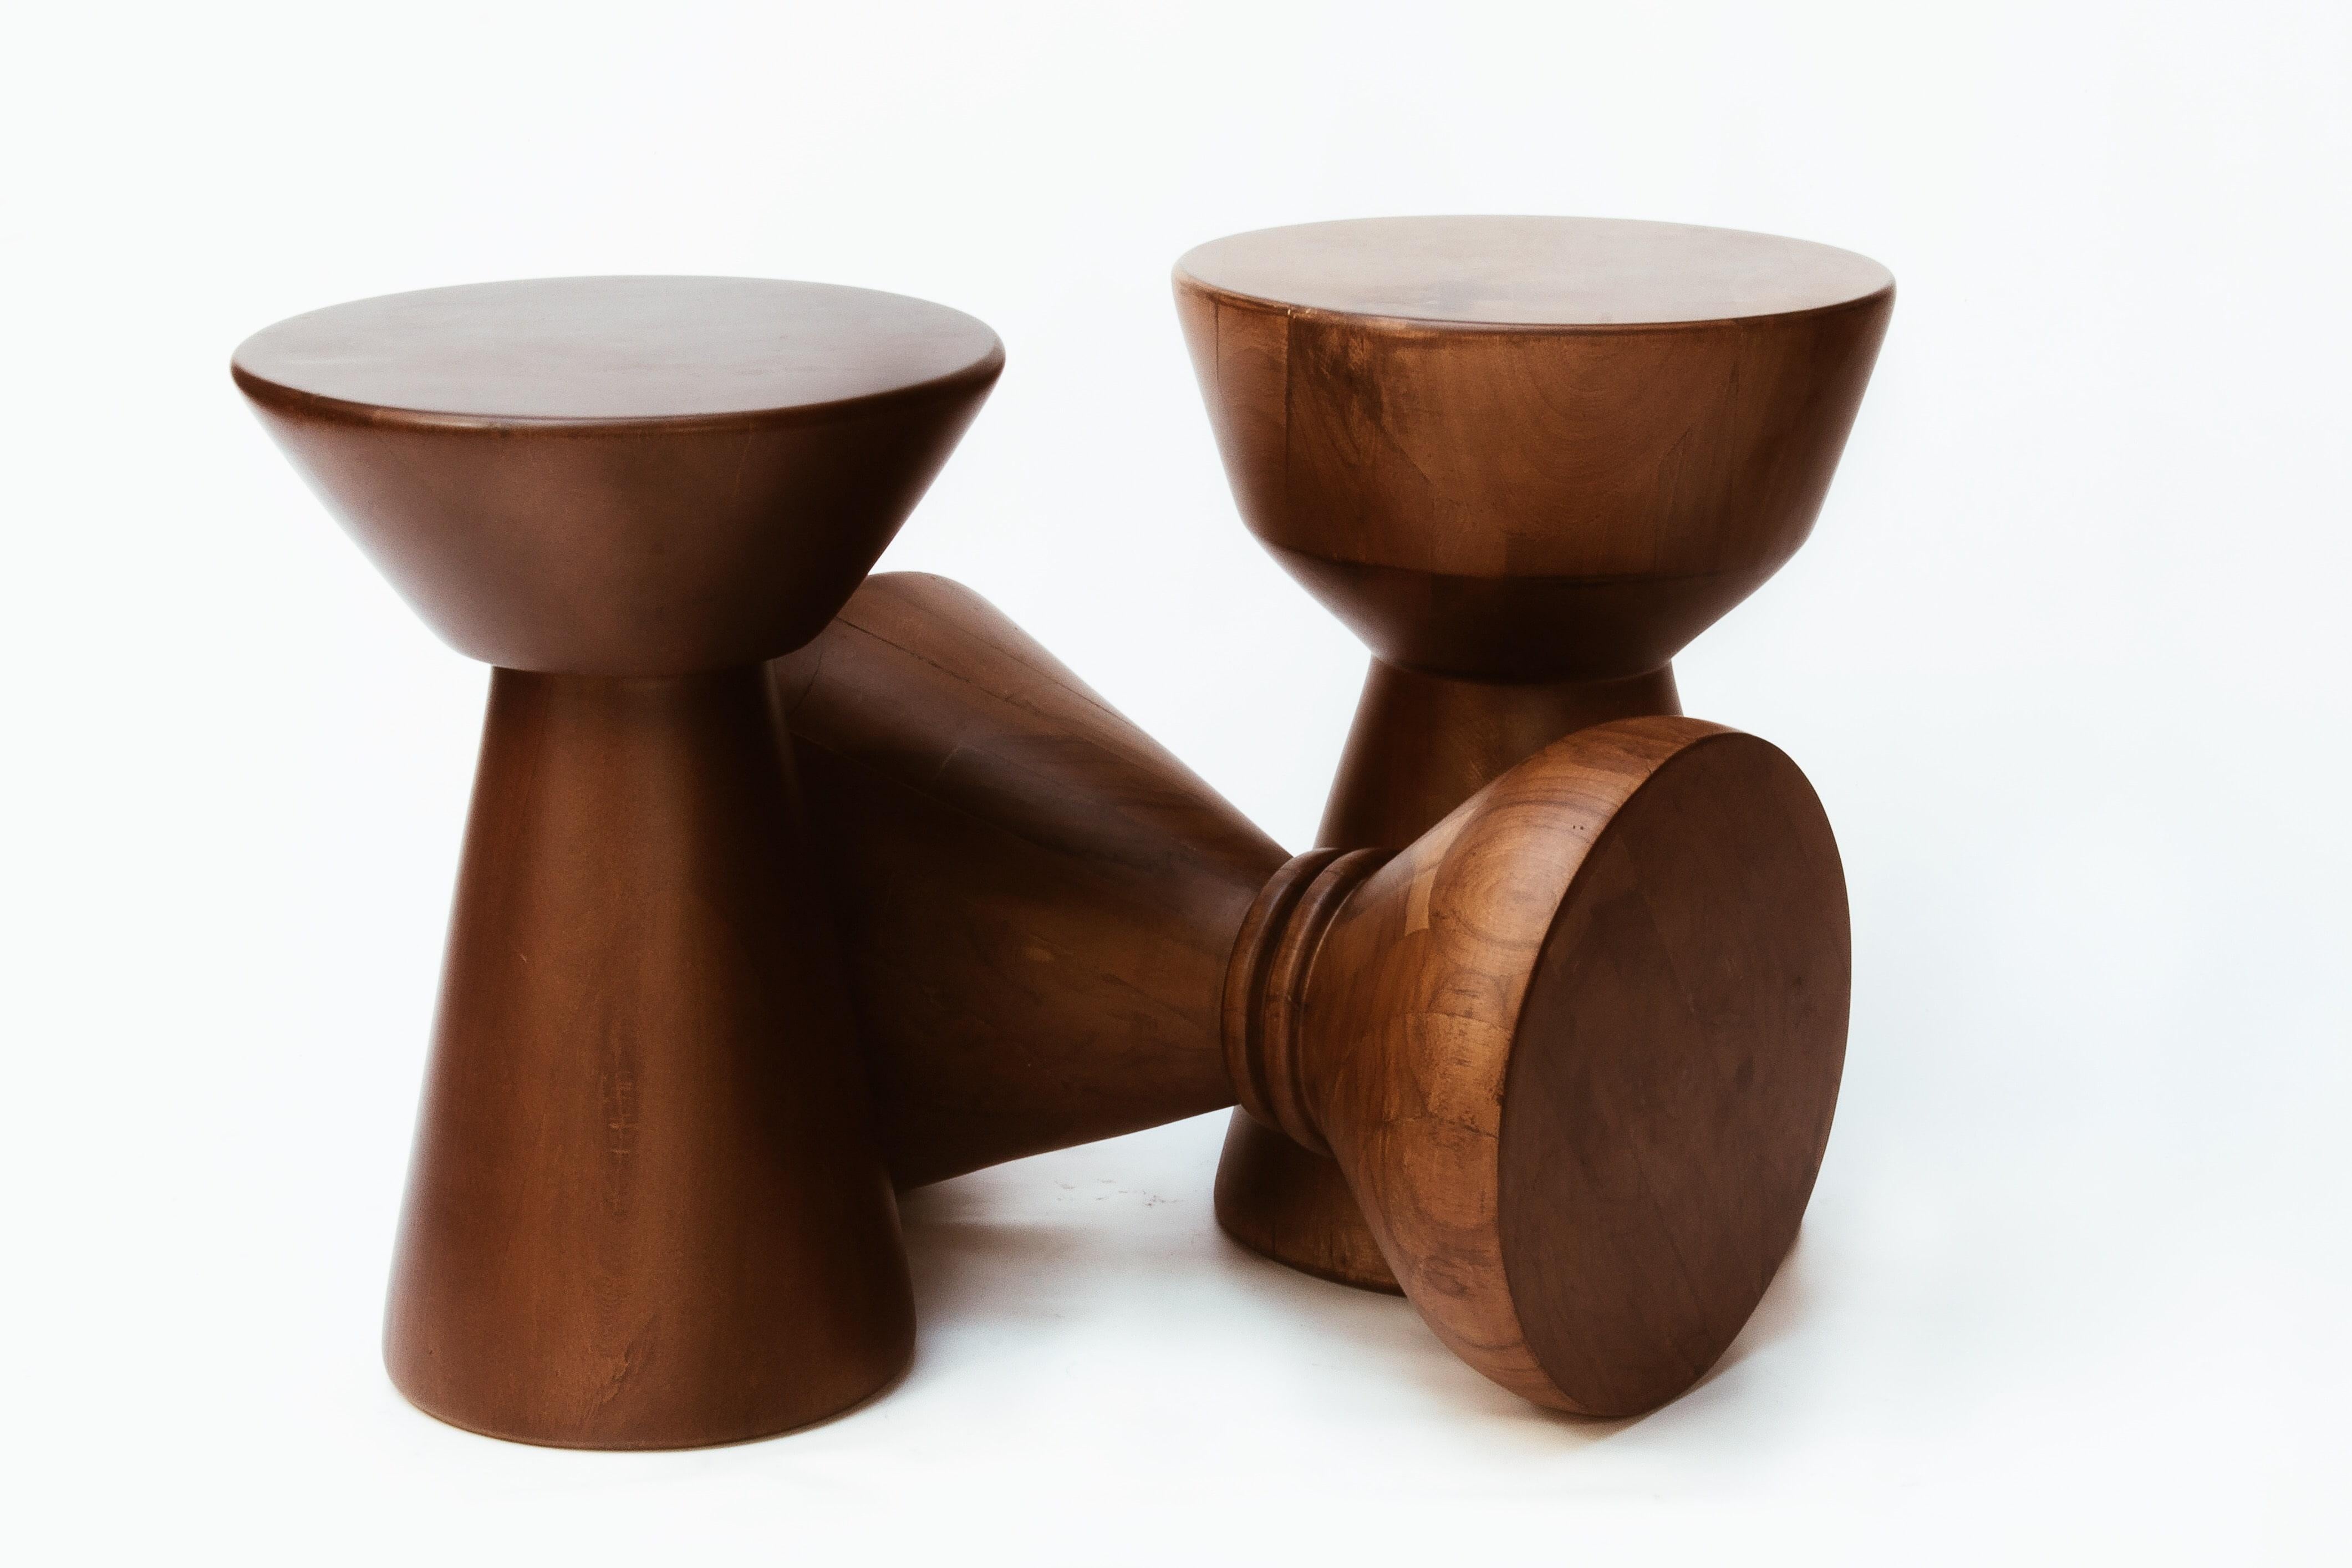 Contemporary Brown Stools by Camilo Andres Rodriguez Marquez (aka CarmWorks)

Solid oak or cedar / Burnt wood or natural

Suitable for outdoor use

Each piece is made to order and hand crafted by the artist.

--
Camilo Andres Rodriguez